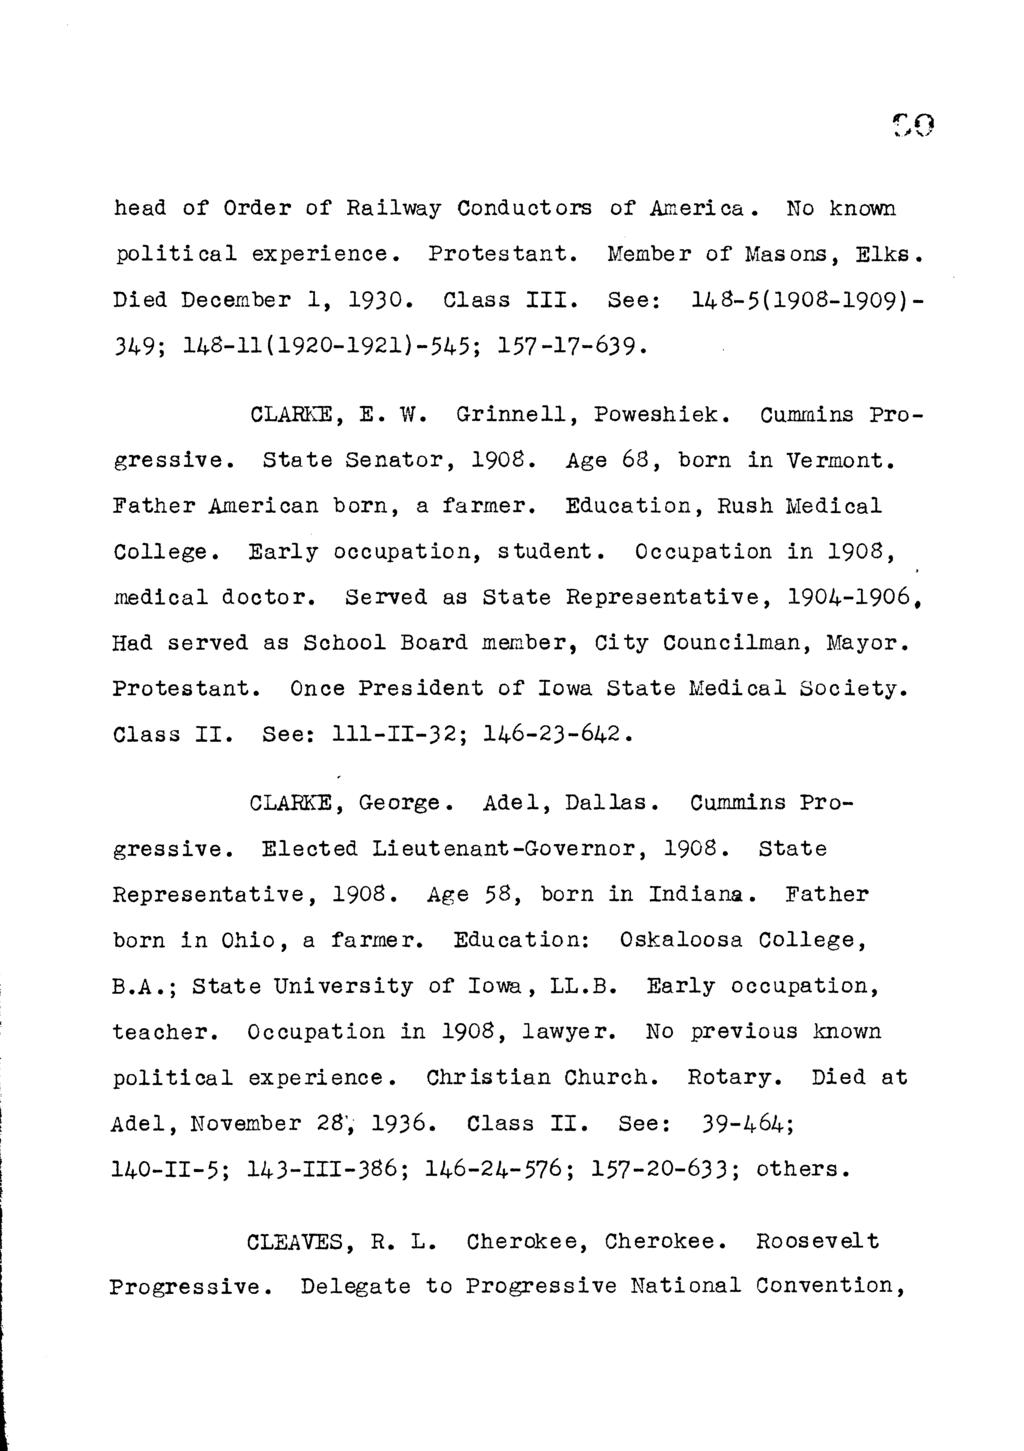 90 head of Order of Railway Conductors of America. No known political experience. Protestant. Member of Masons, Elks. Died December 1, 1930. Class III.